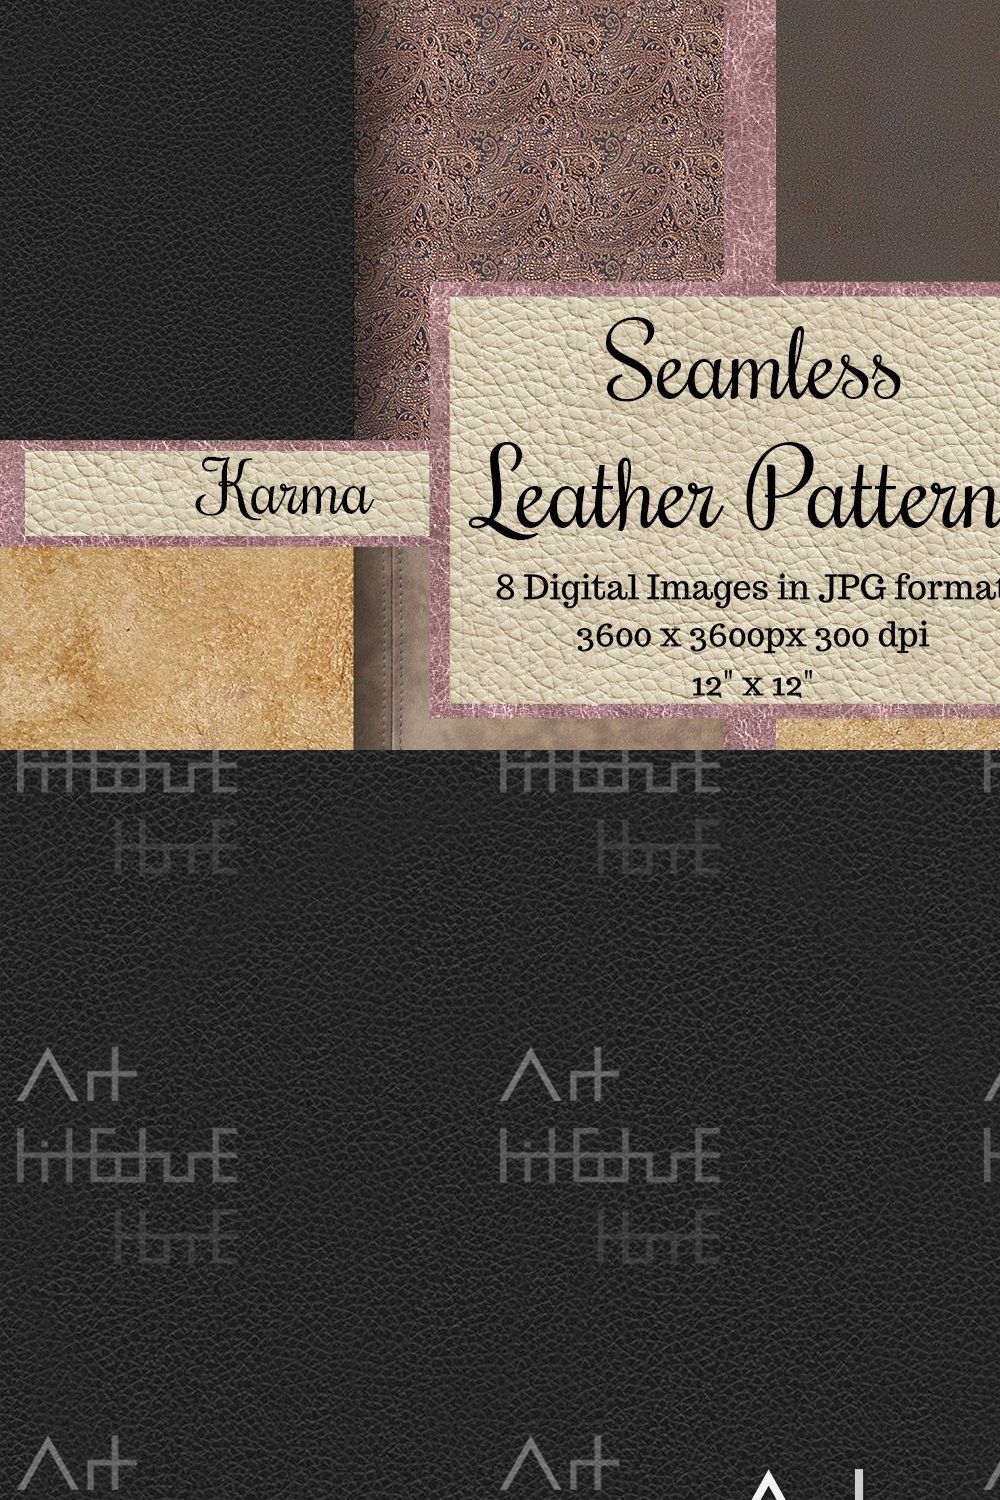 Seamless Leather Patterns - Karma pinterest preview image.